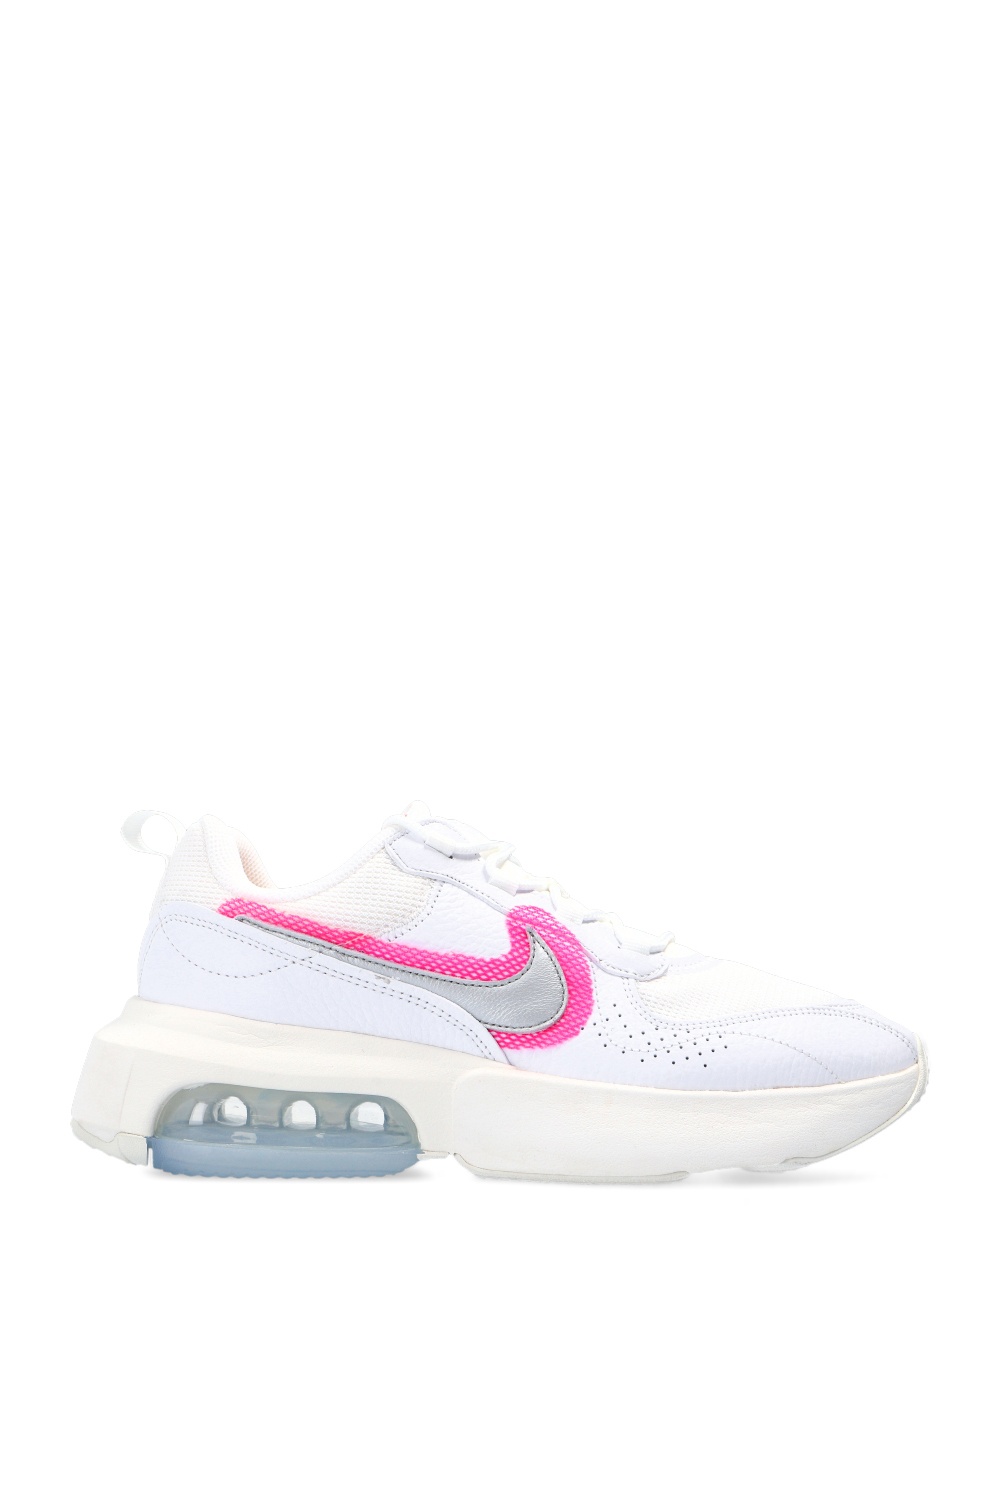 nike air max 2018 for girls